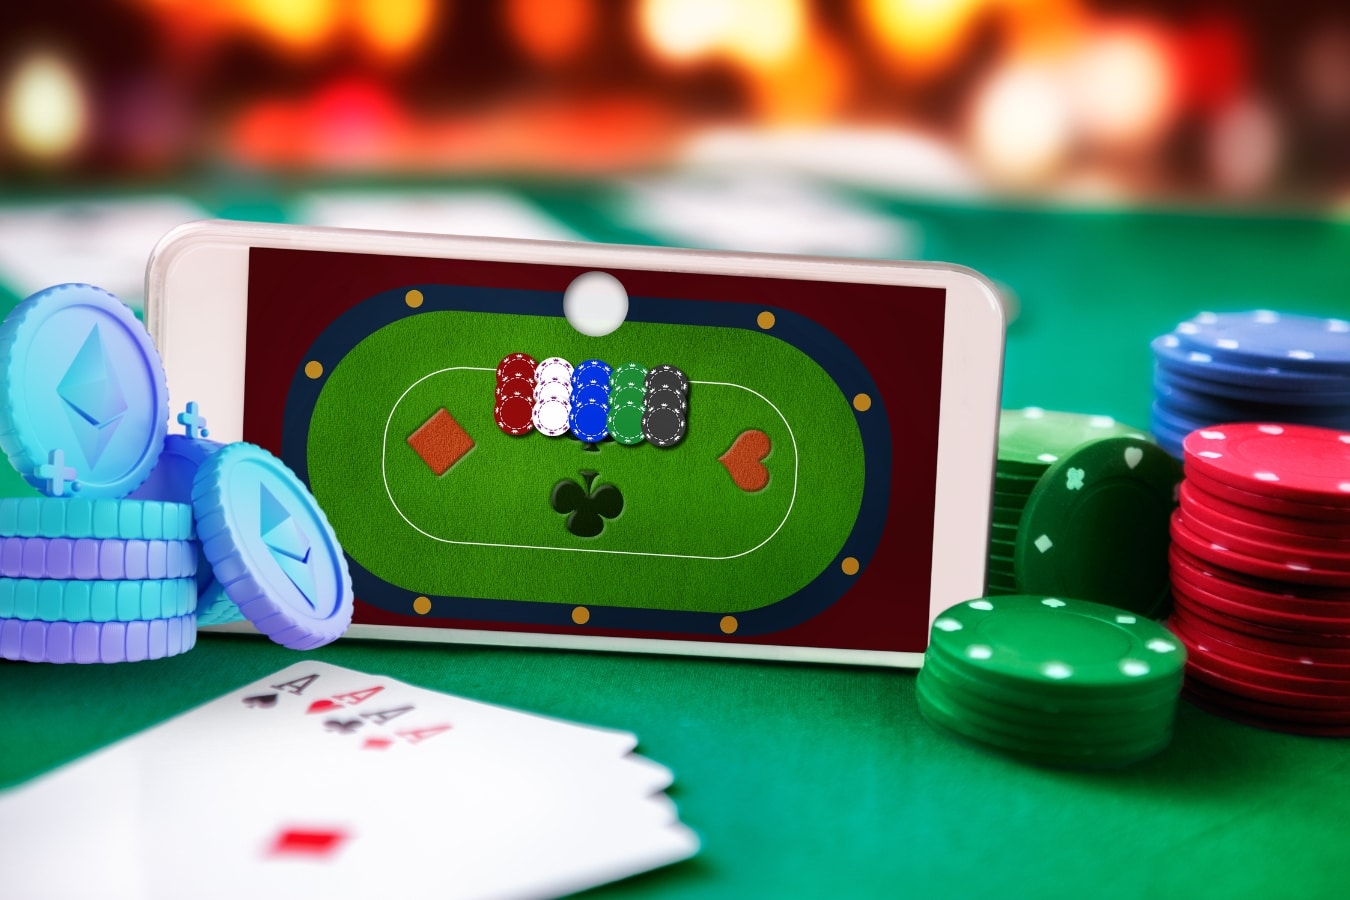 How to Stay Safe While Gambling at Ethereum Casinos